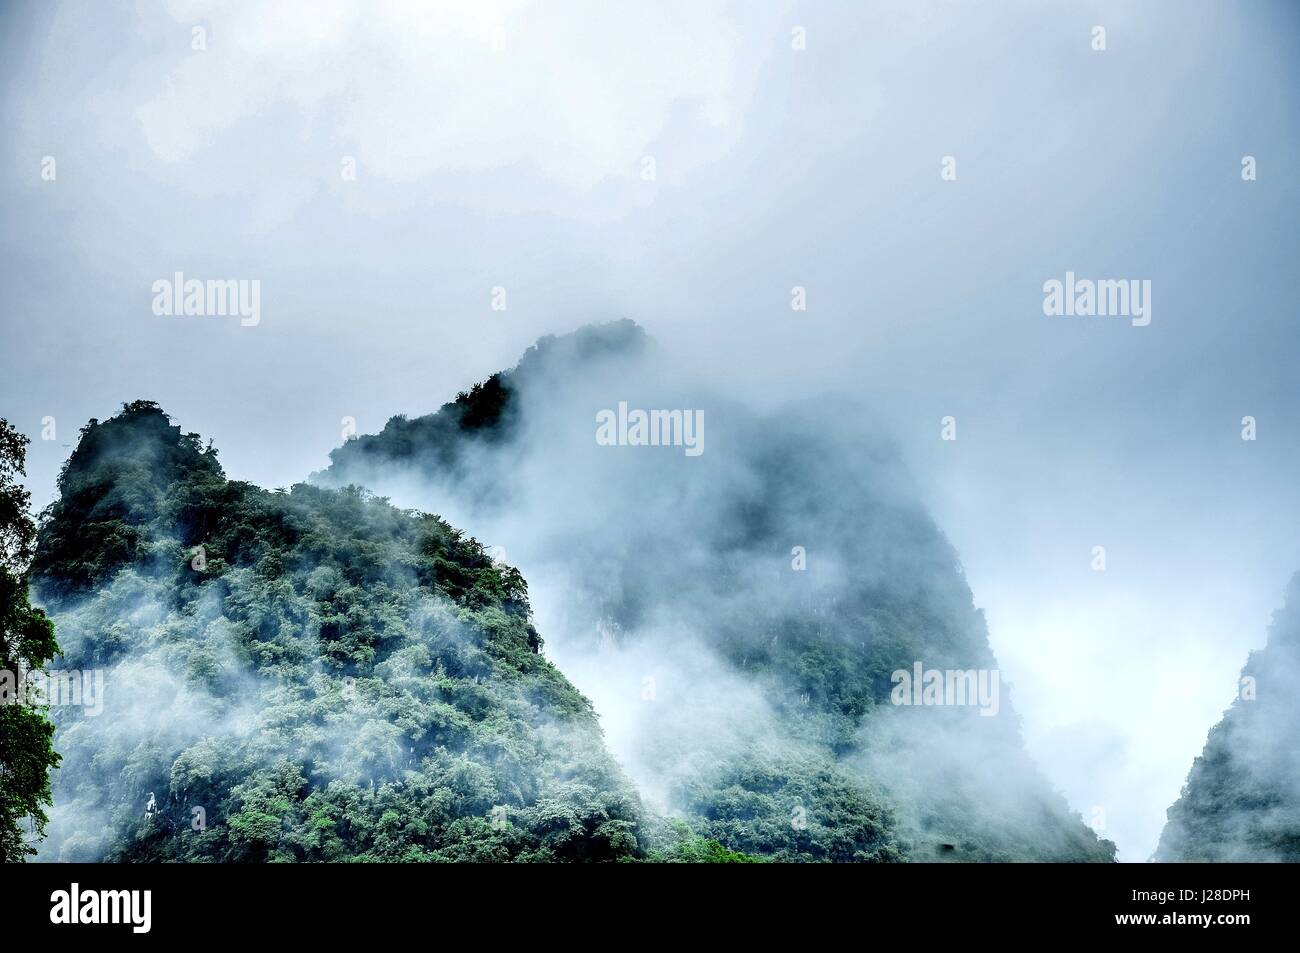 Mountains scenery in the mist Stock Photo